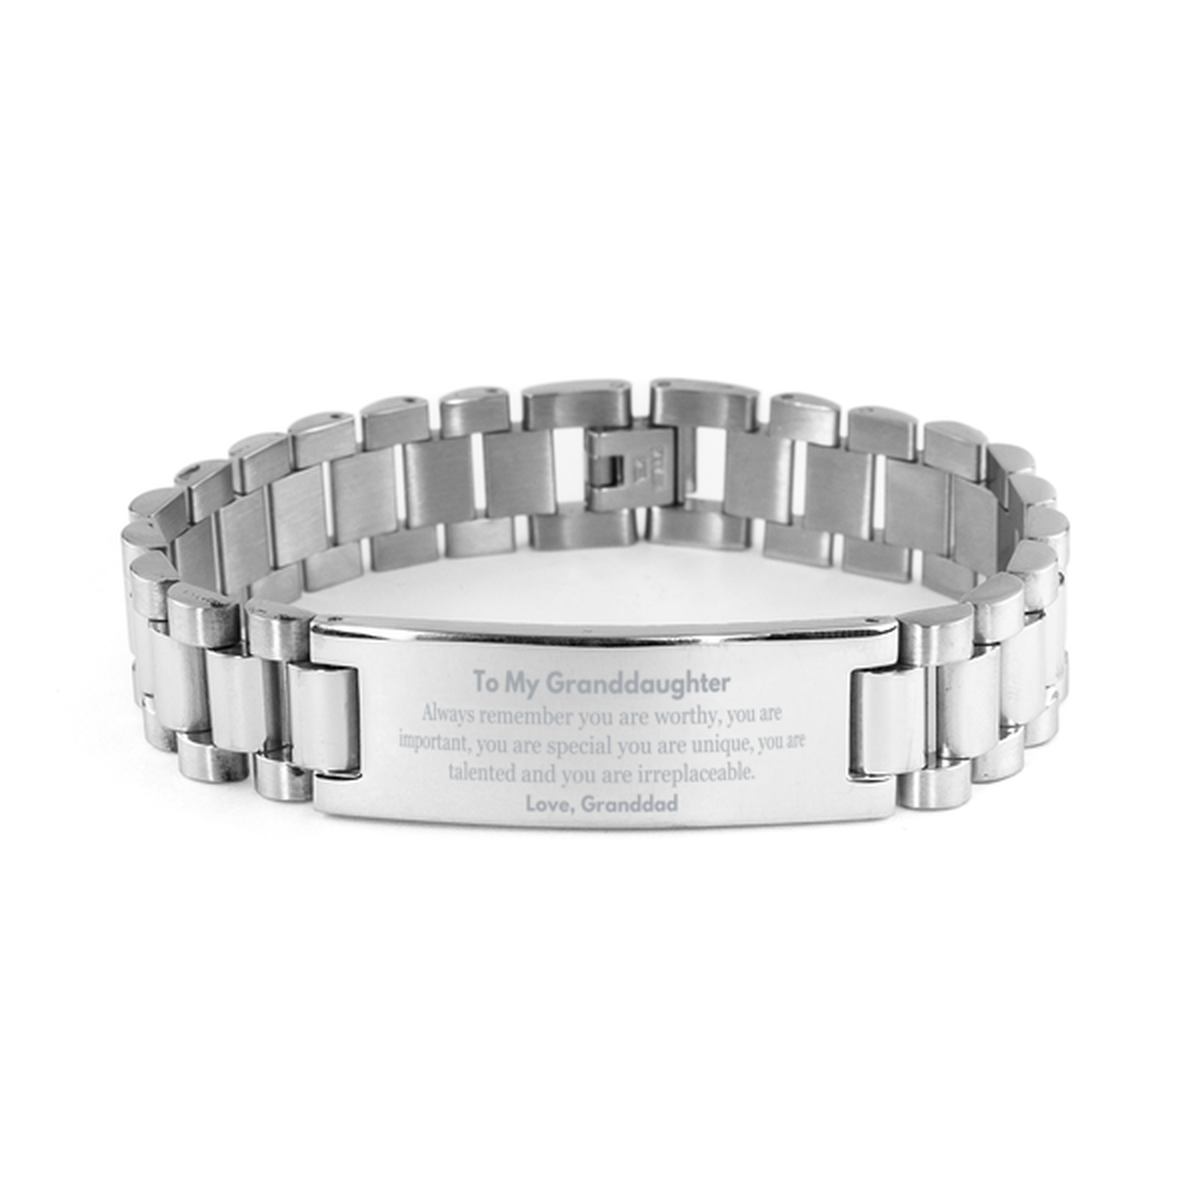 Granddaughter Birthday Gifts from Granddad, Inspirational Ladder Stainless Steel Bracelet for Granddaughter Christmas Graduation Gifts for Granddaughter Always remember you are worthy, you are important. Love, Granddad